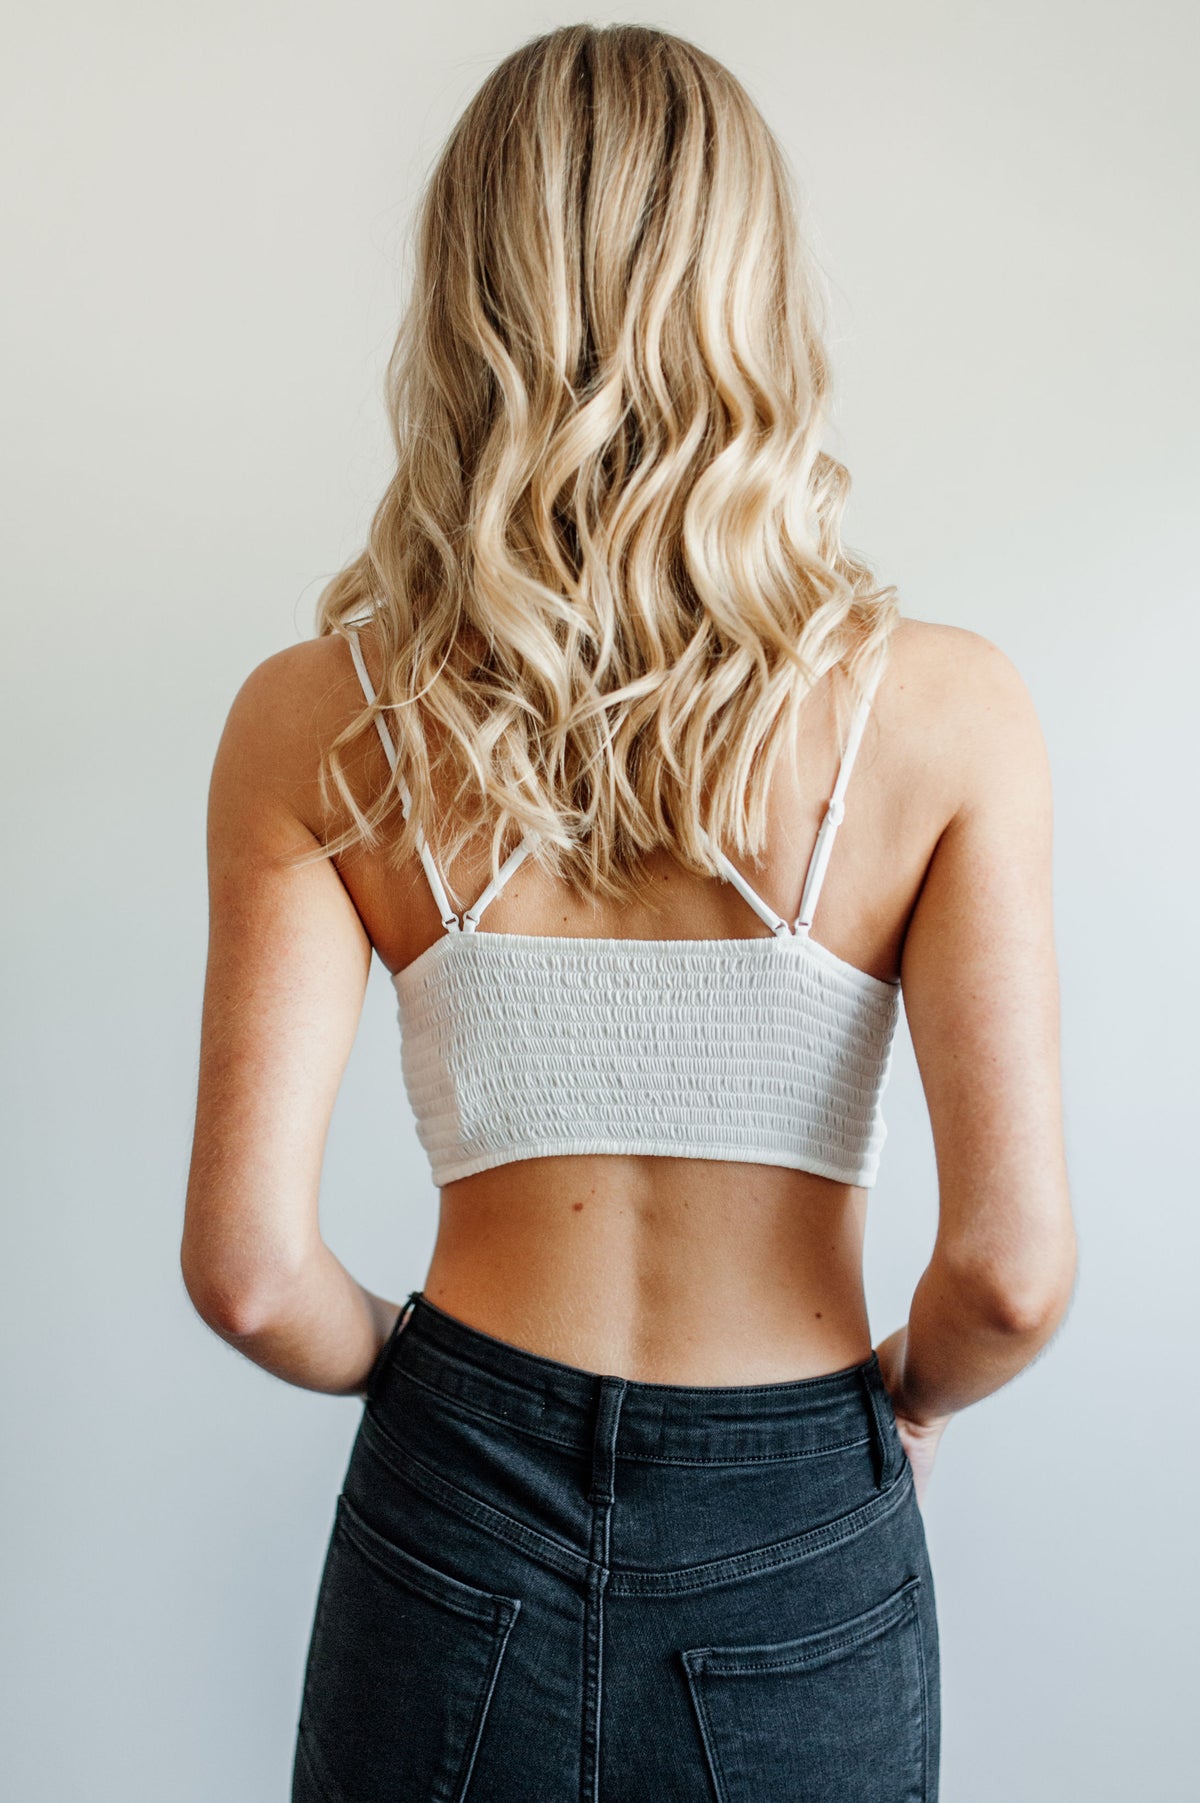 Pictured is a white, lace bralette garment with strappy criss-cross shoulder straps, ruched backing, padded cups, and cropped style.